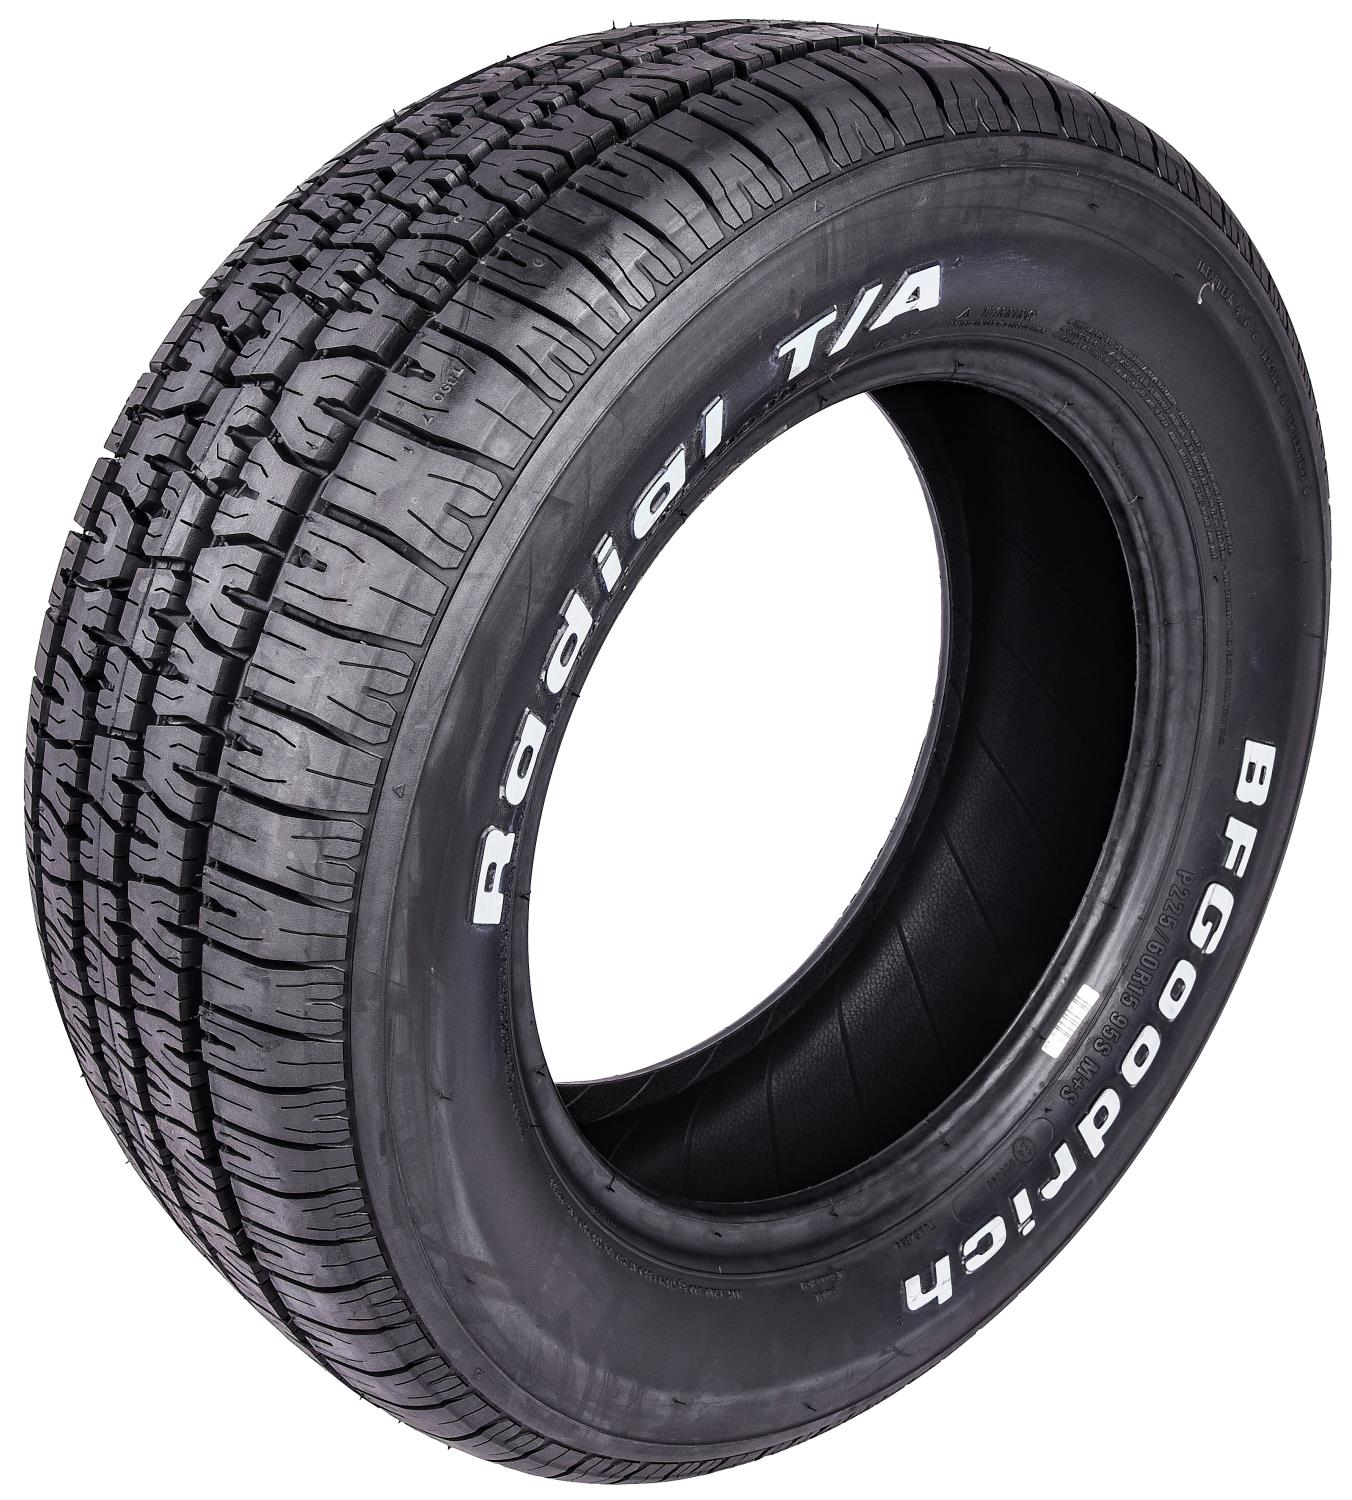 Radial T/A Tire P225/60R15